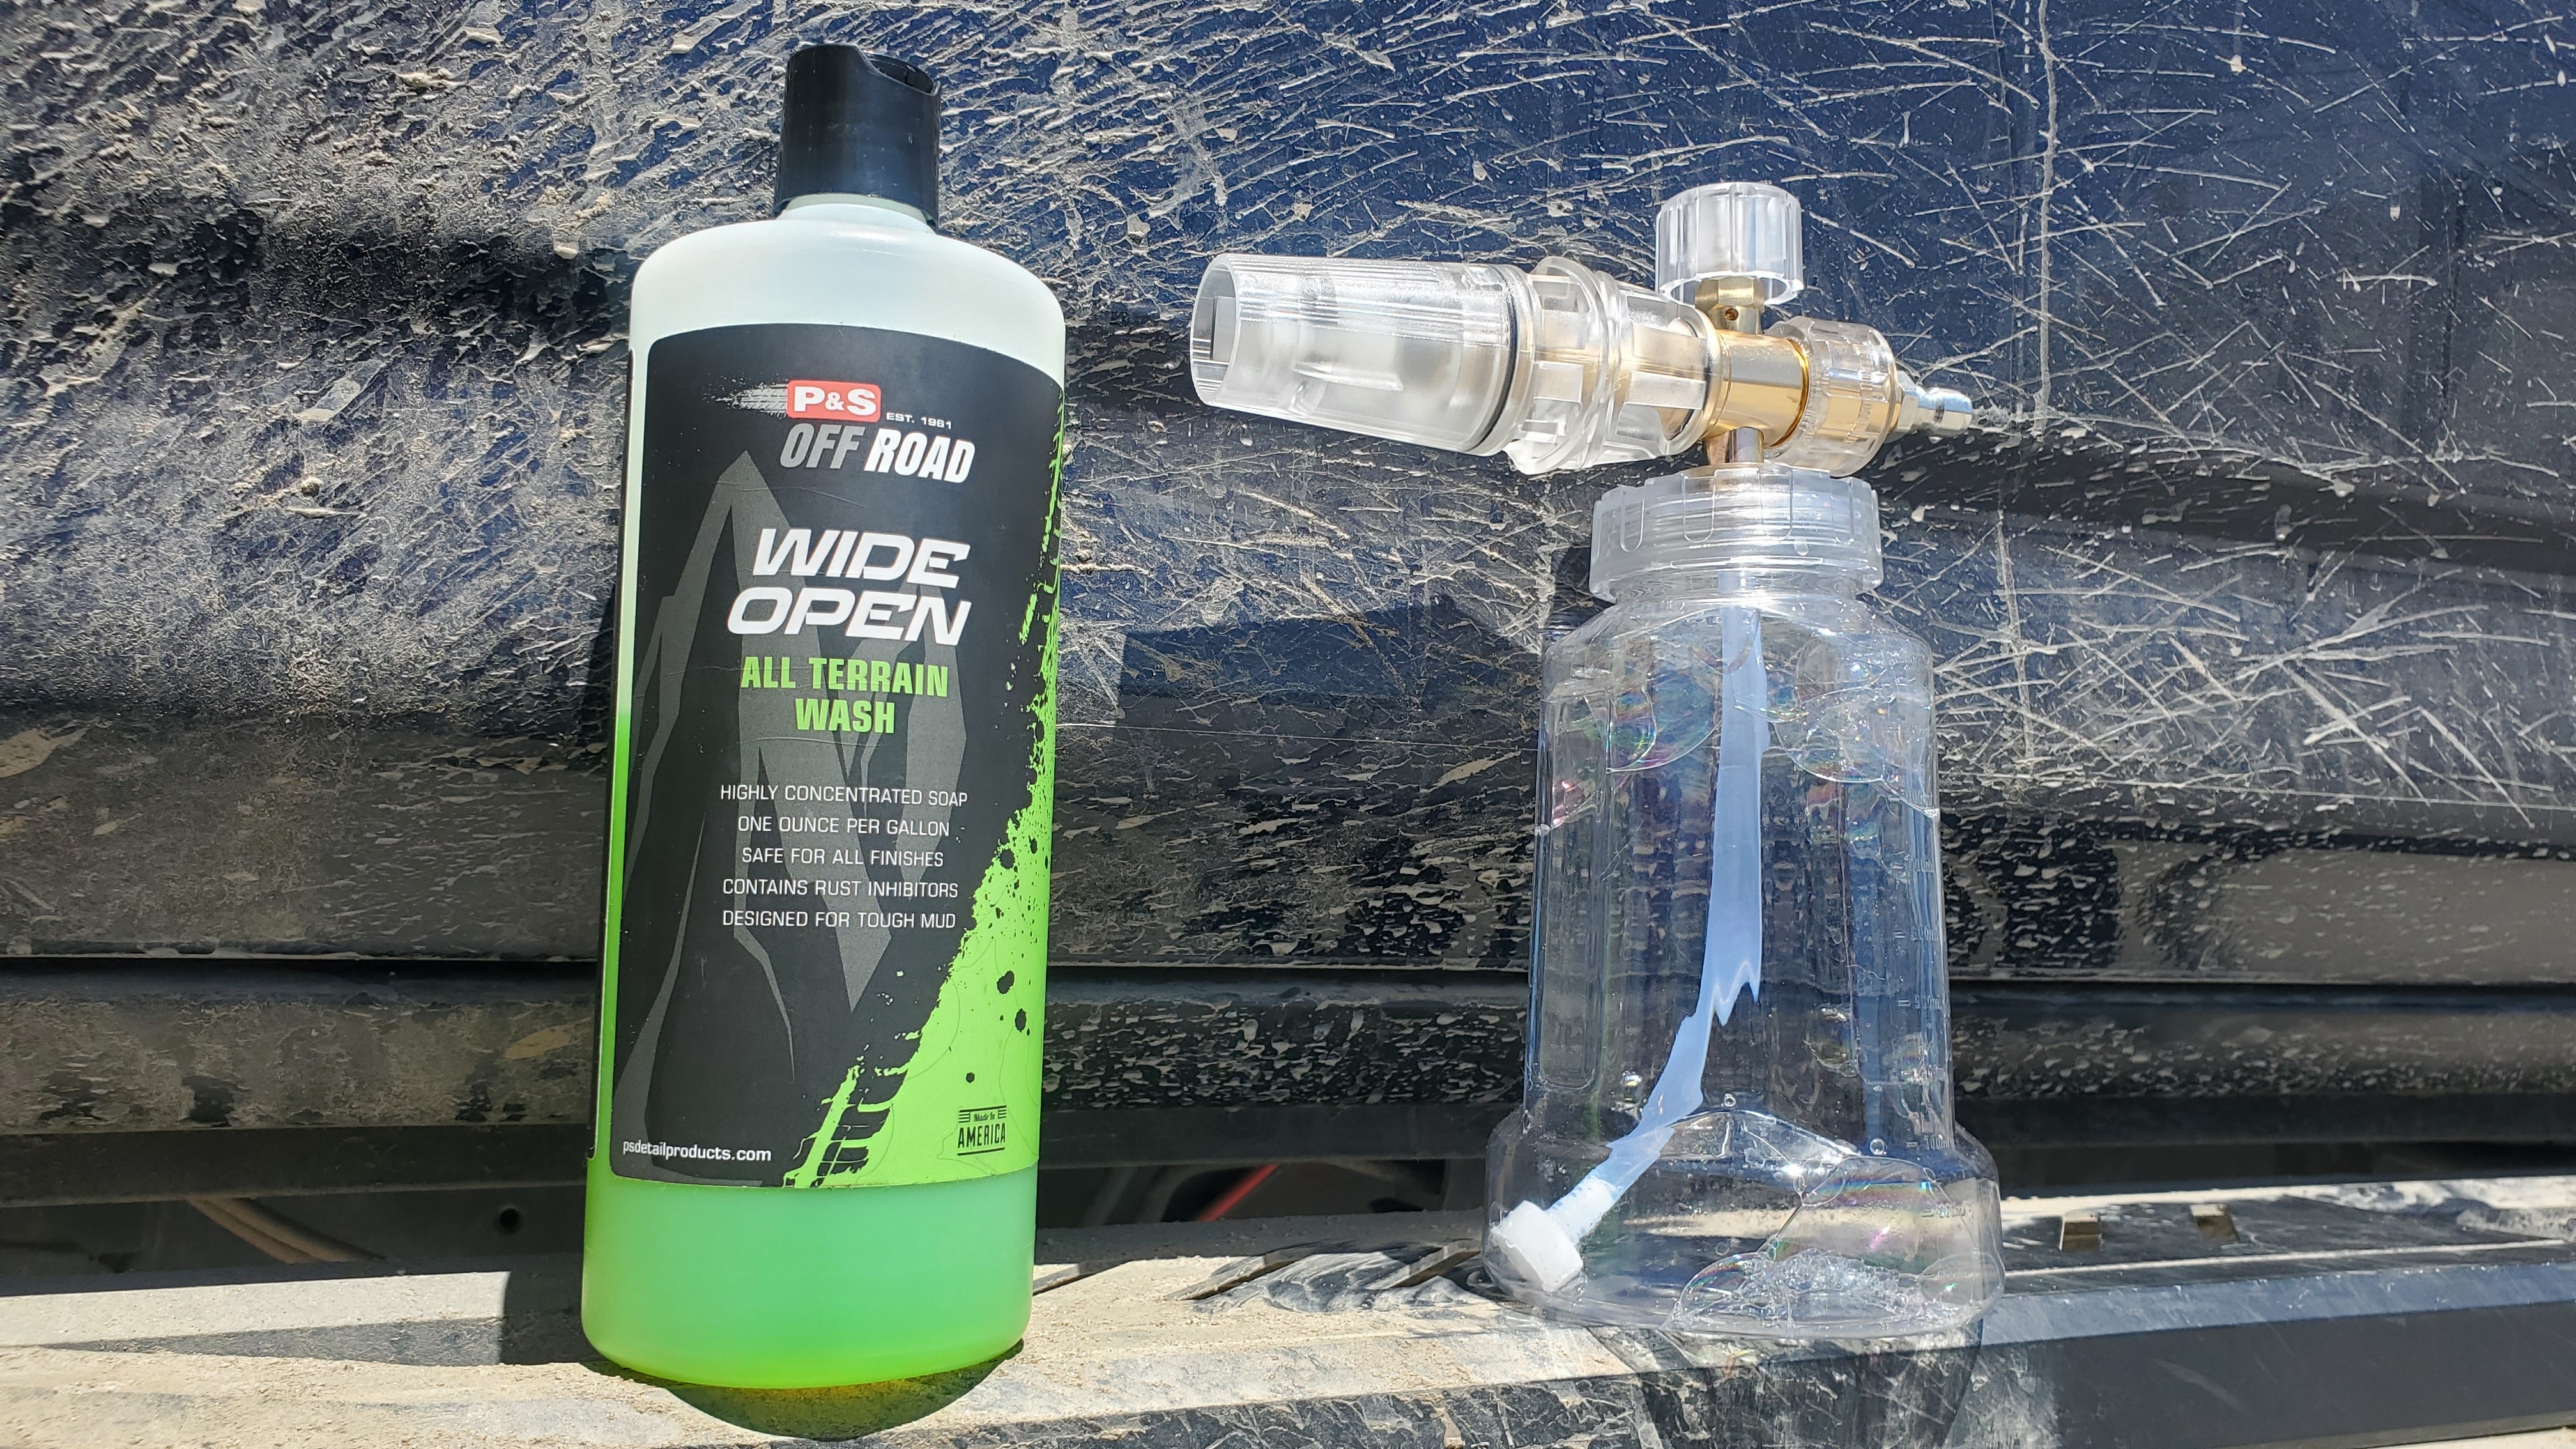 P&S OFF-ROAD COLLECTION WIDE OPEN Soap and PIT STOP DETAIL SPRAY